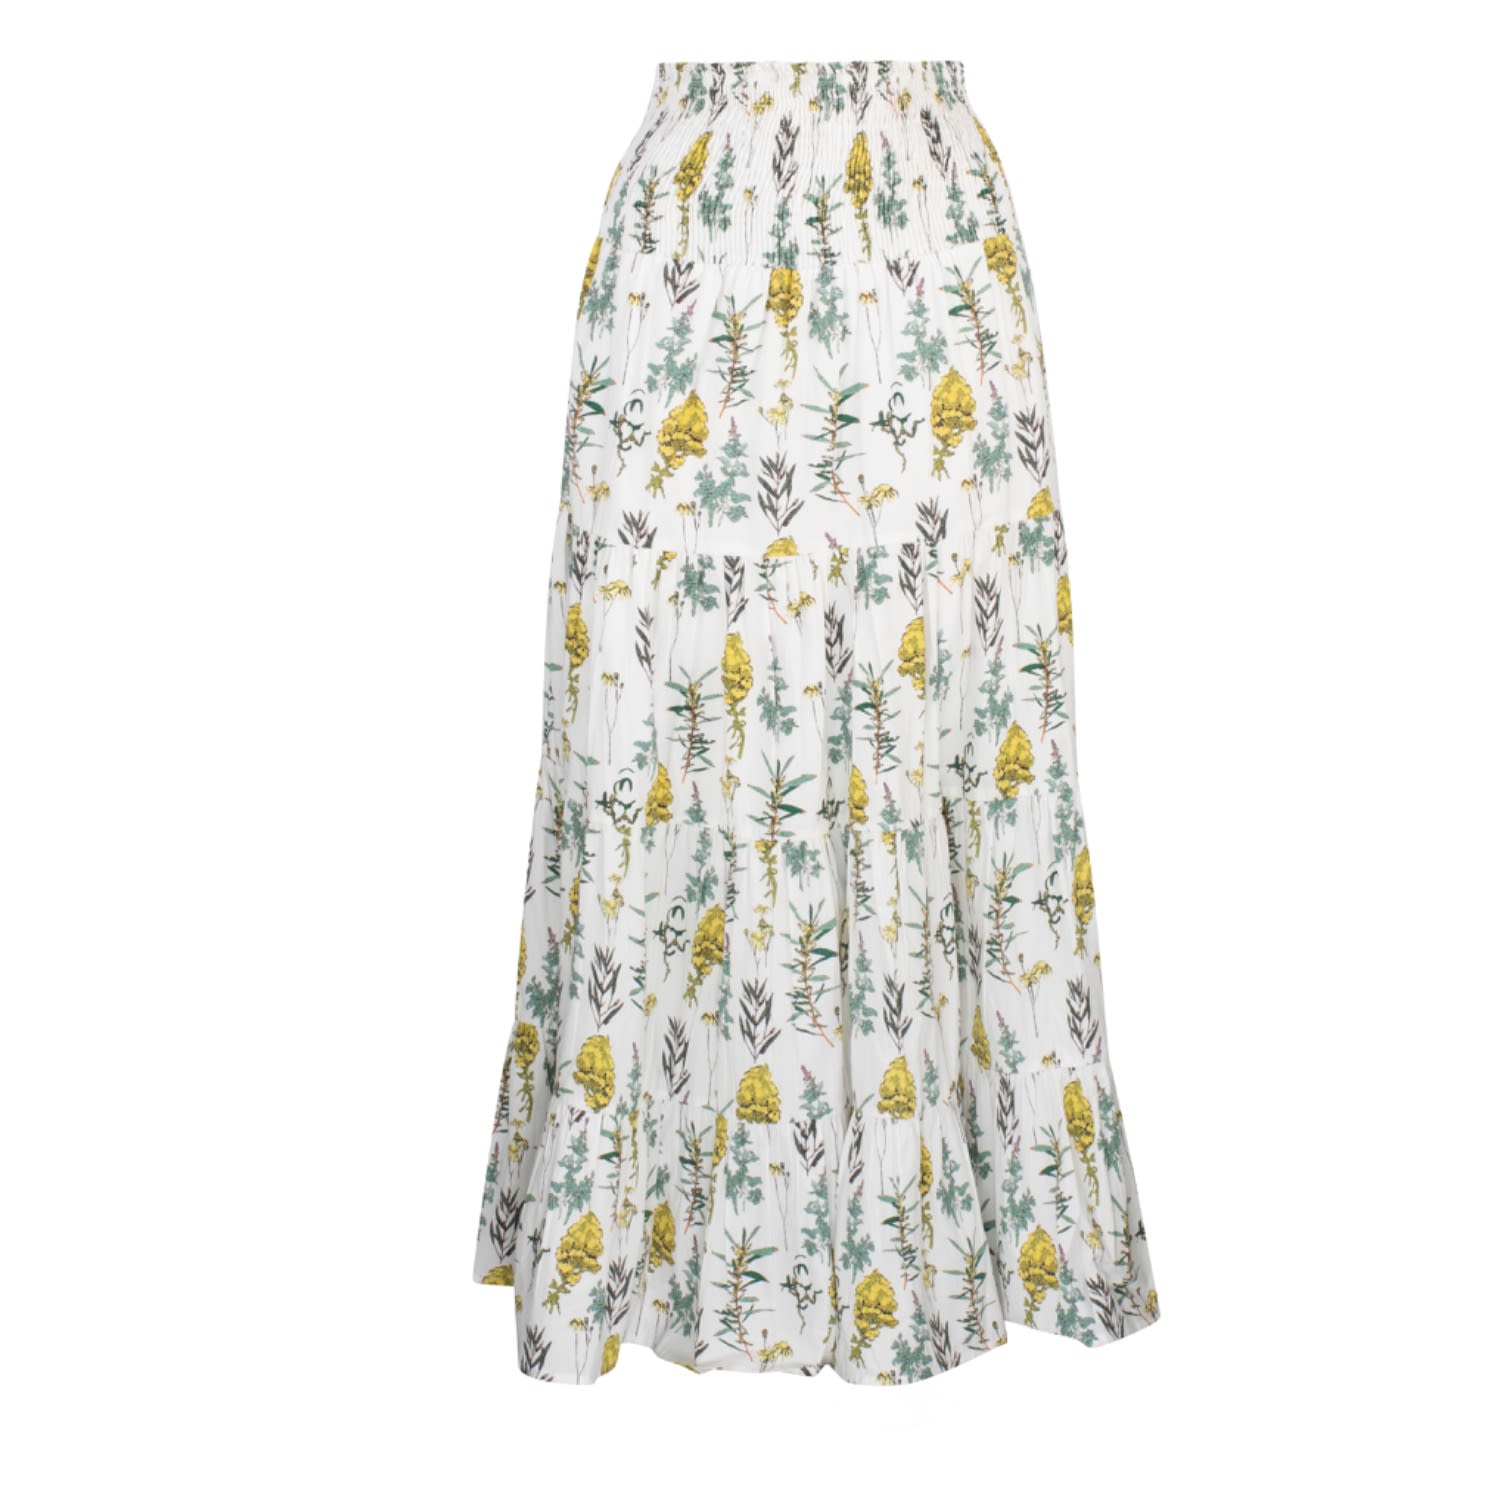 Women’s Delilah Maxi Skirt White Floral S/M Goldie Hour